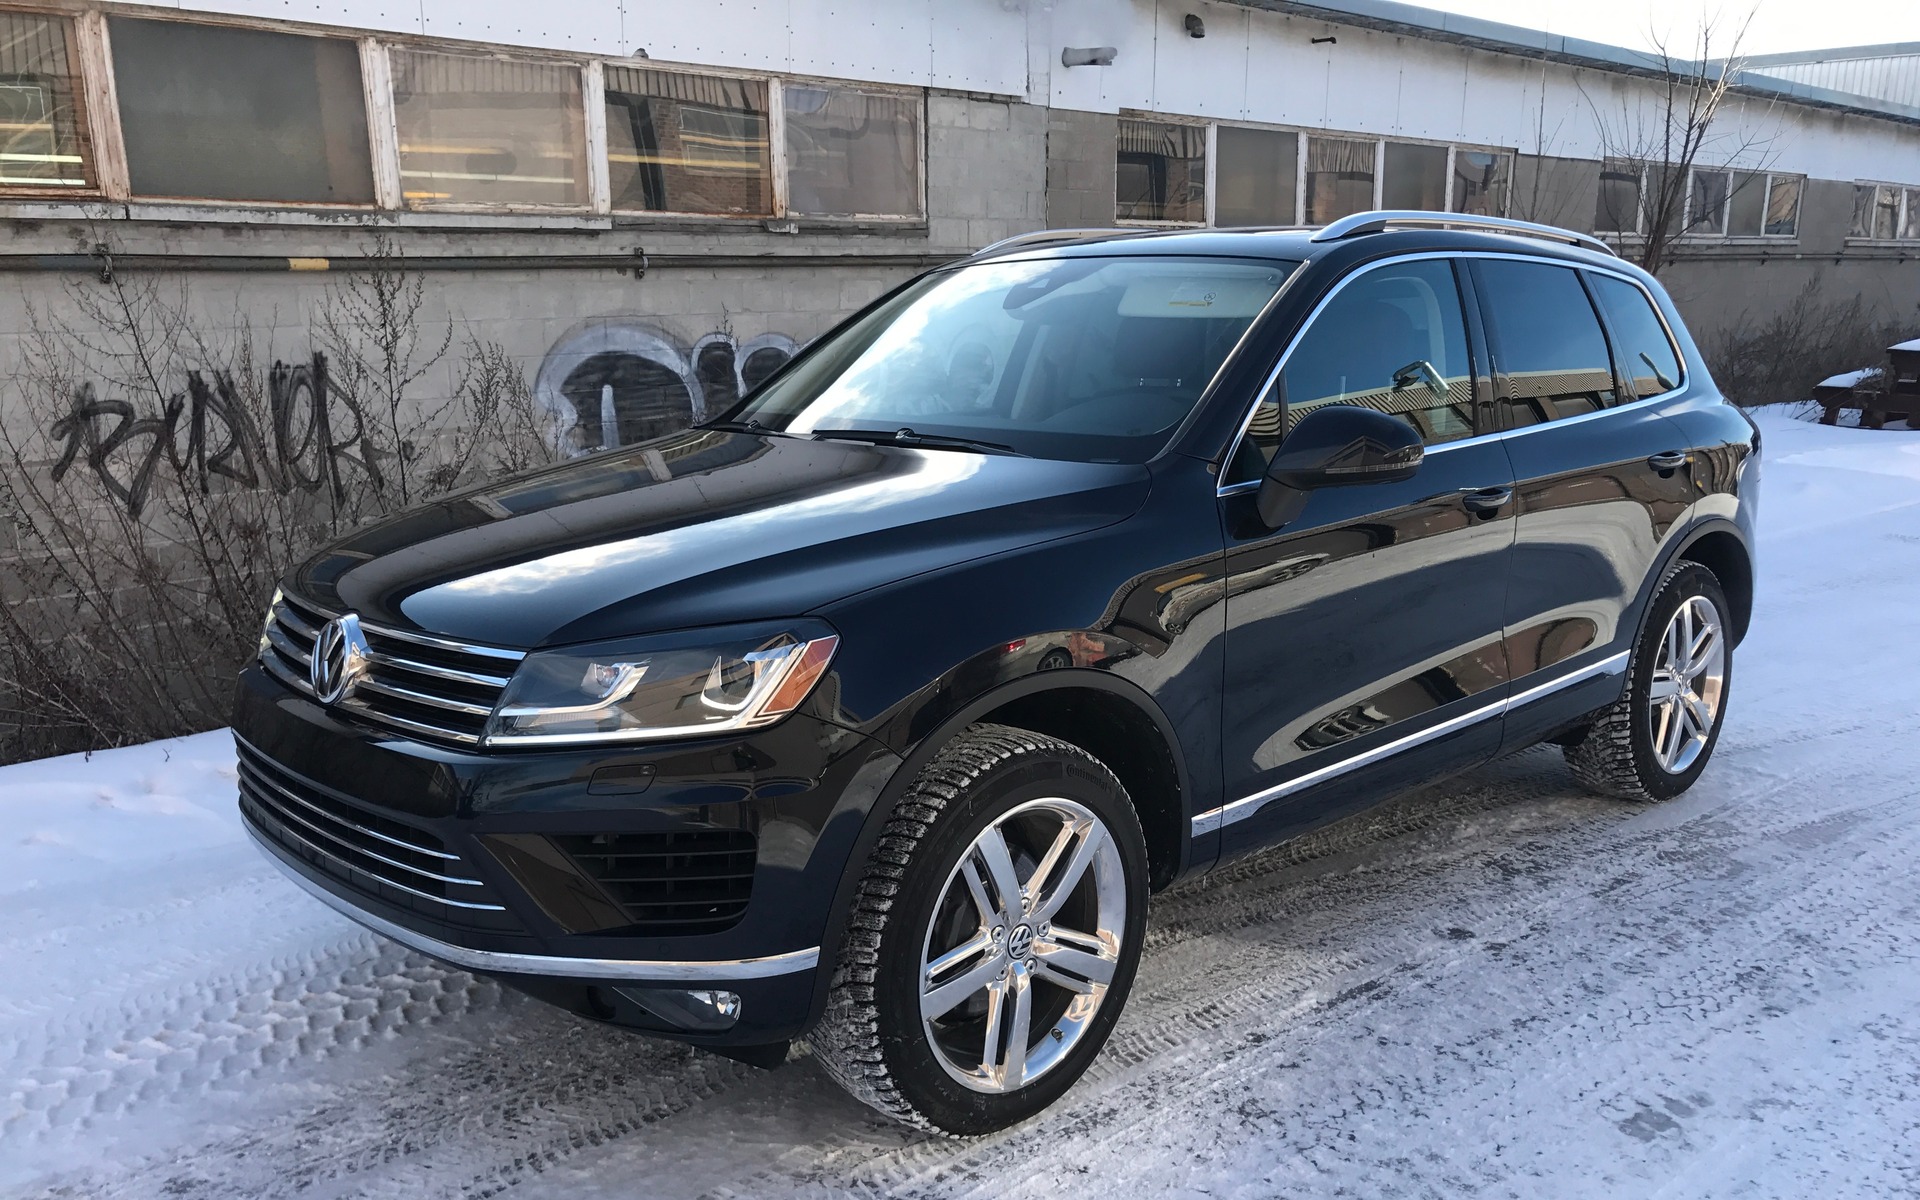 2017 Volkswagen Touareg: Luxury in Disguise - The Car Guide